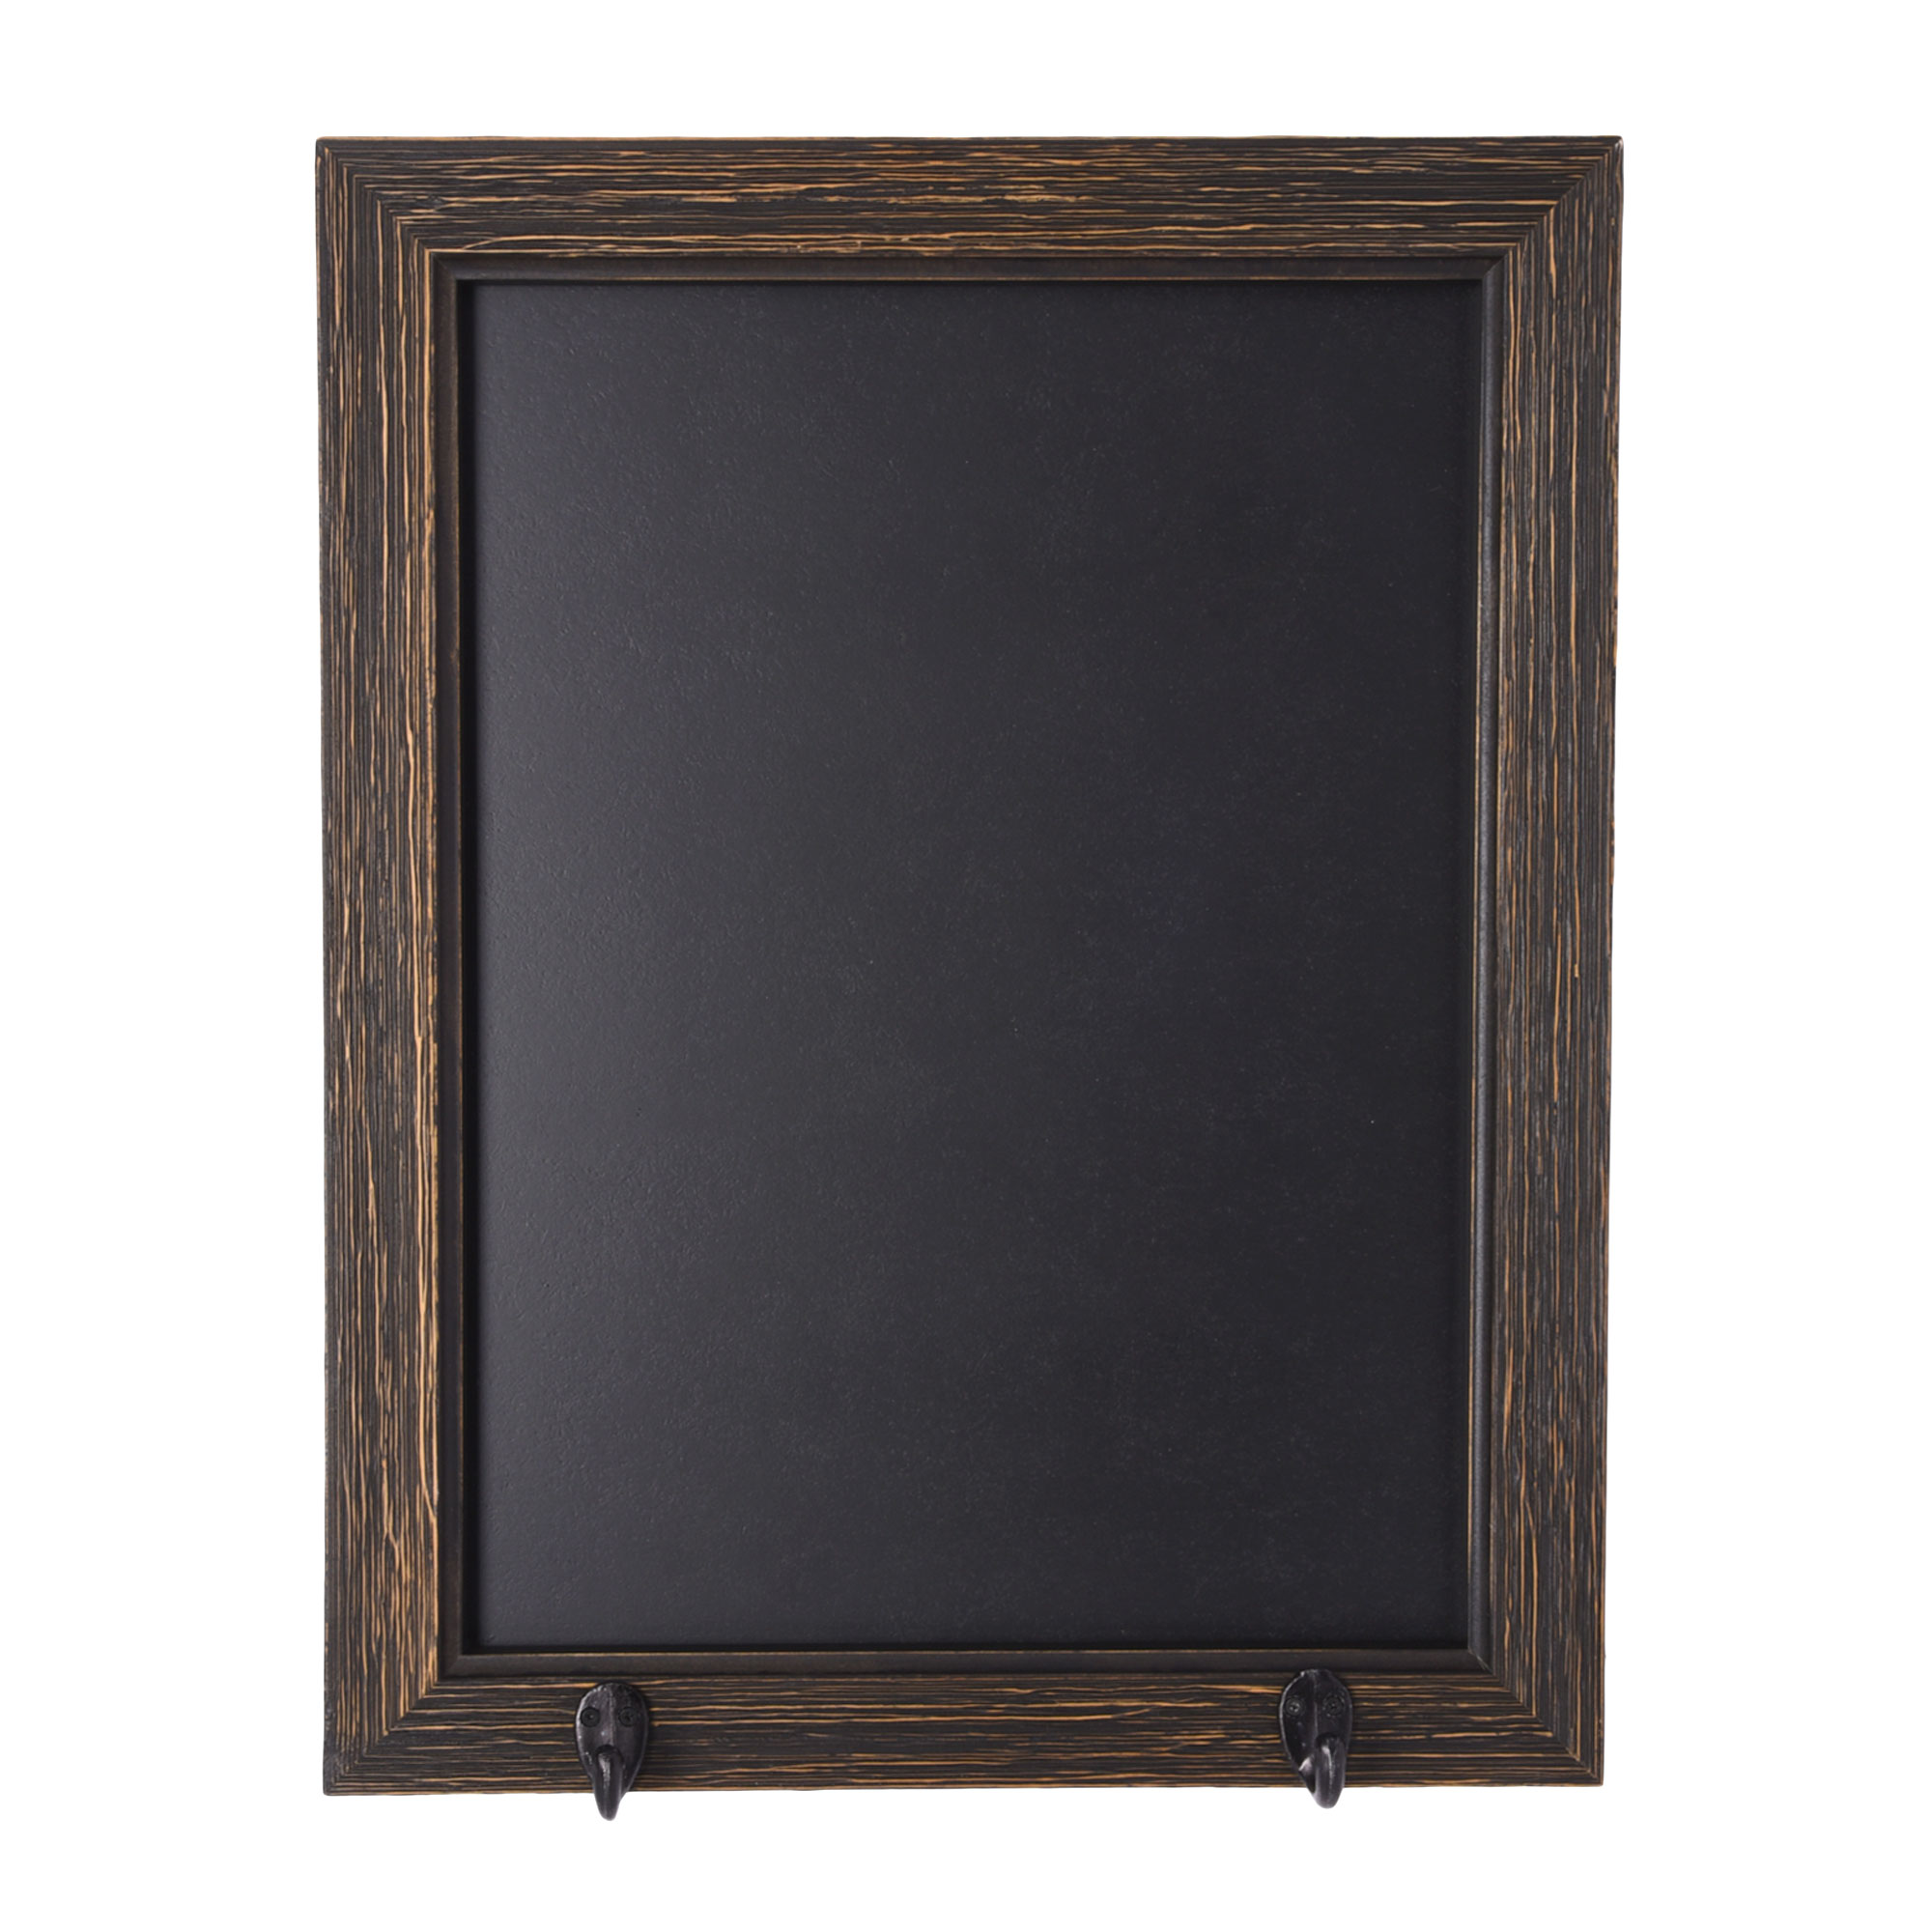 111129268-Wood Wire Brushed Chalkboard with Hooks 12 x 16 -1.jpg